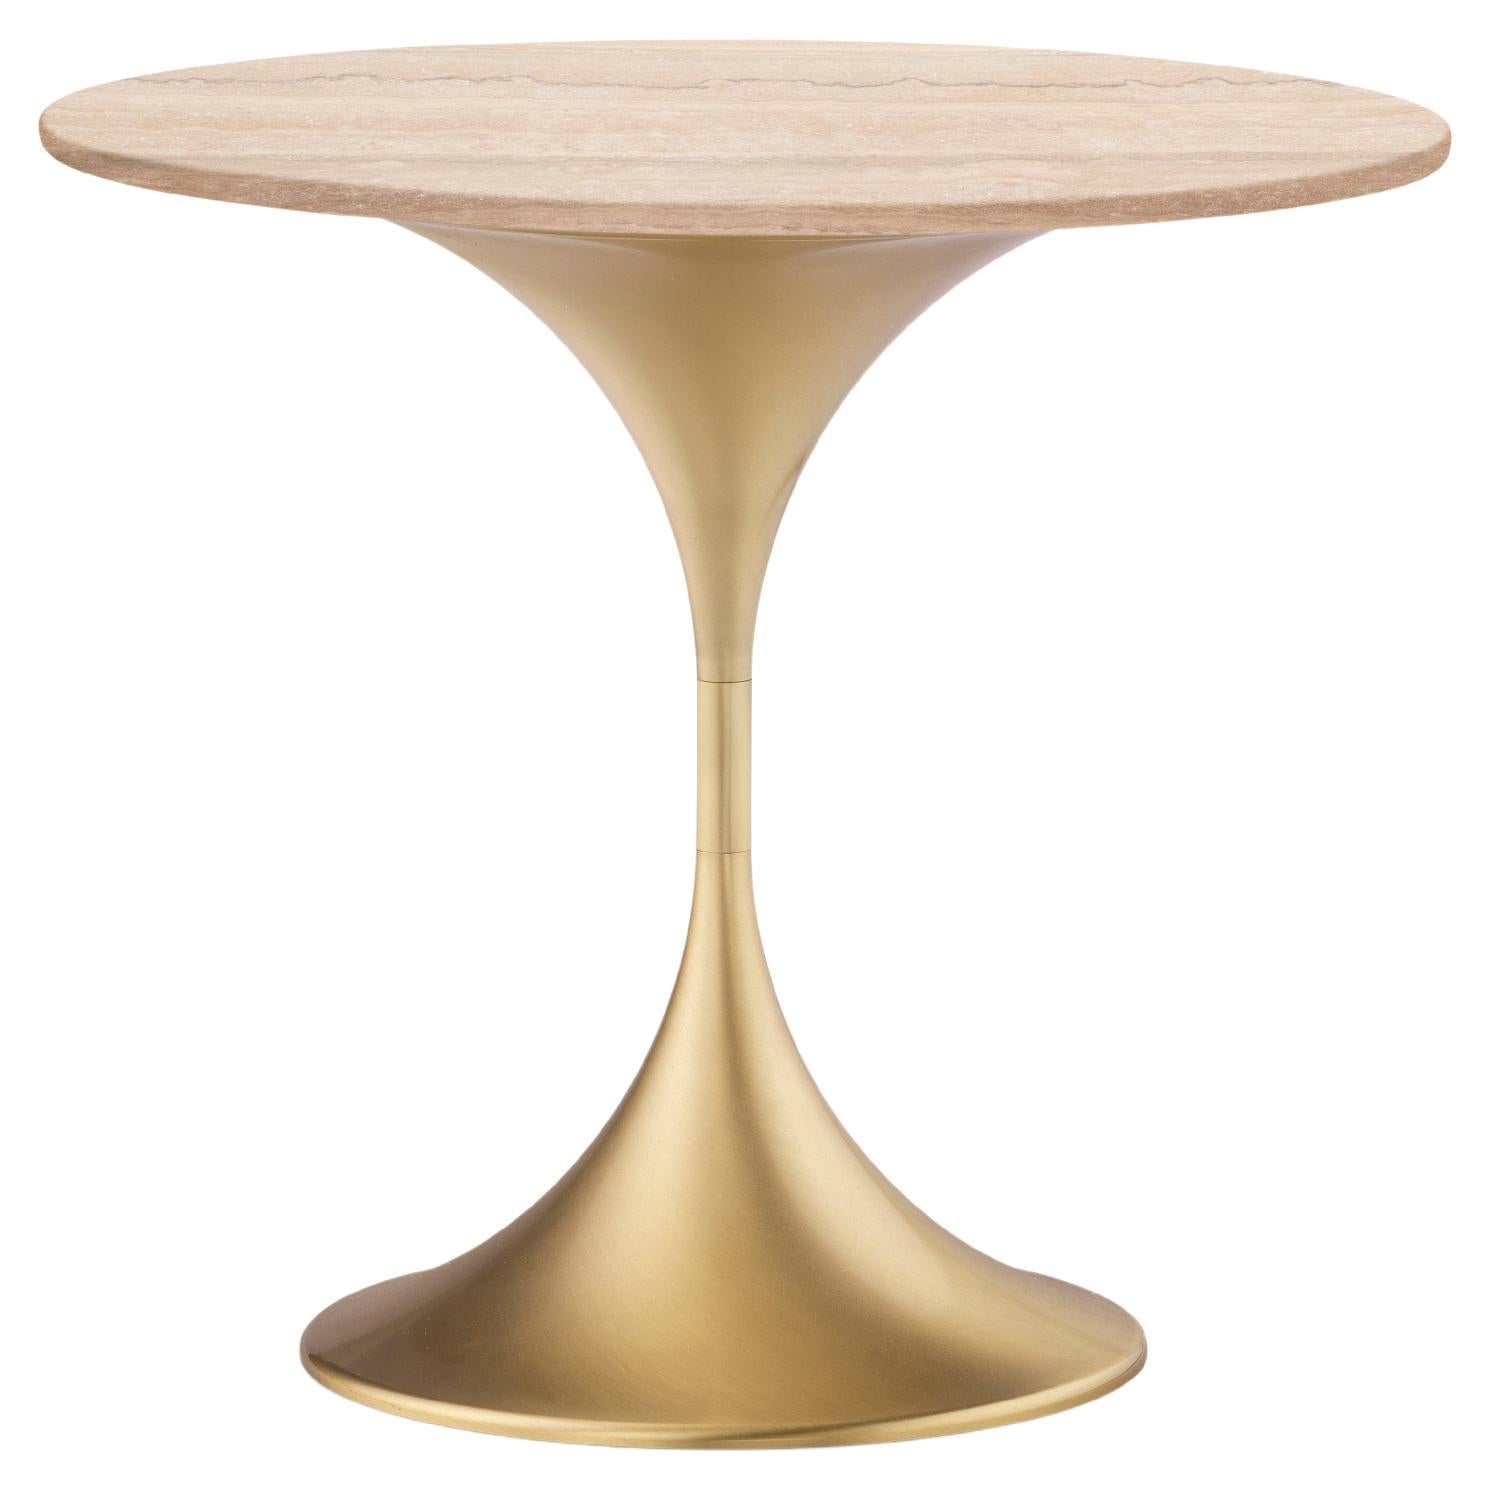 Dapertutto Short Table, Travertine Top, Satin Brass , Made in Italy For Sale